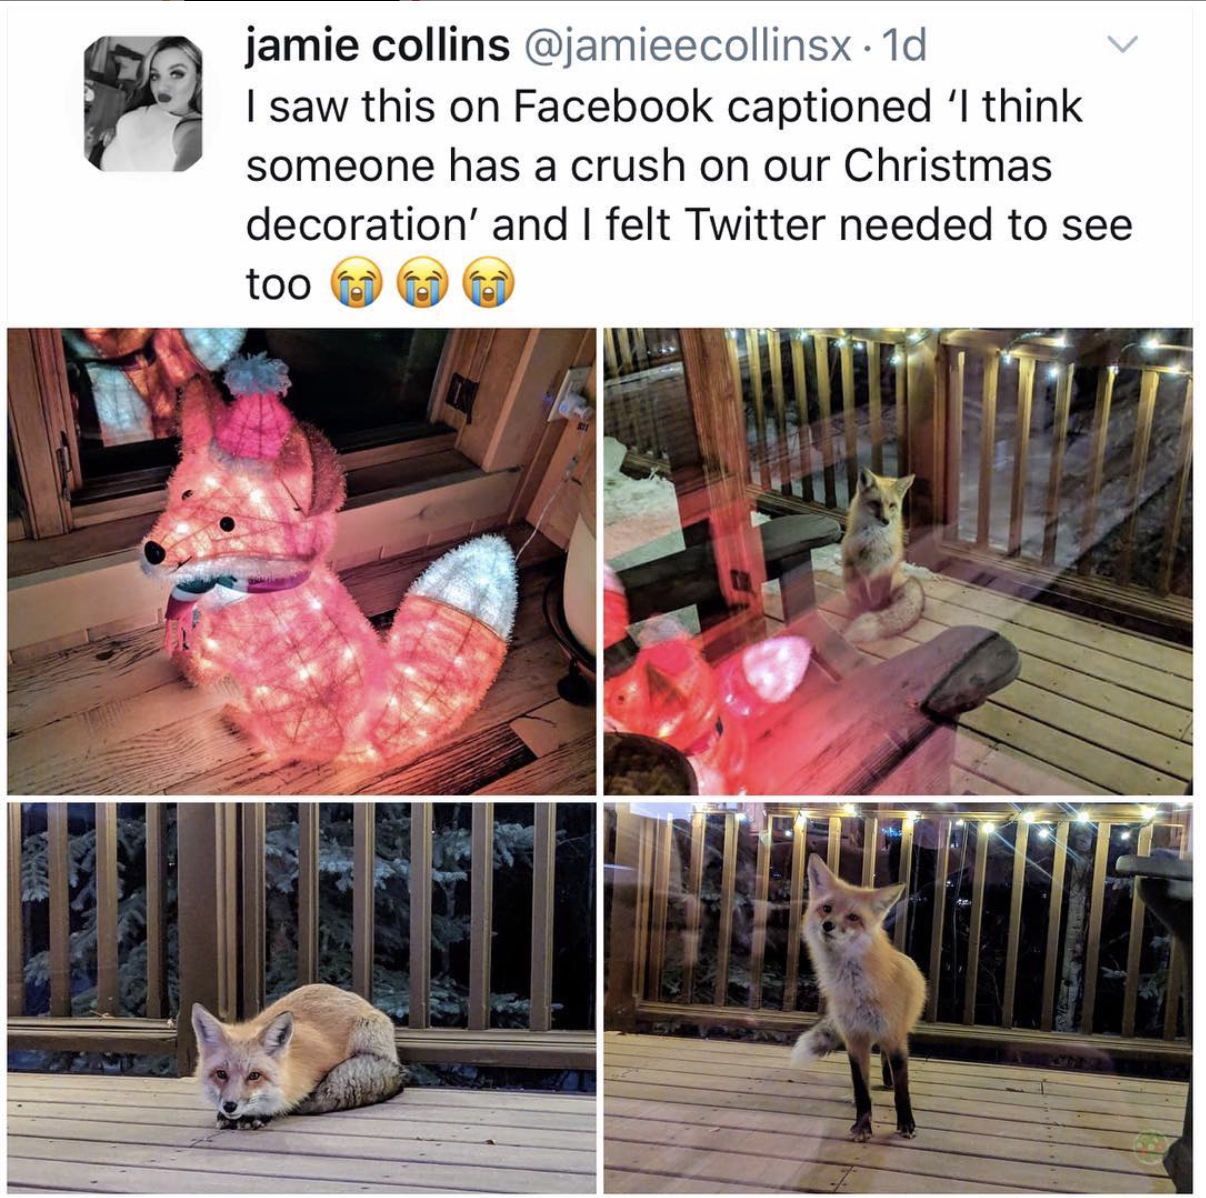 fox has a crush on decoration - jamie collins . 1d I saw this on Facebook captioned 'I think someone has a crush on our Christmas decoration' and I felt Twitter needed to see too